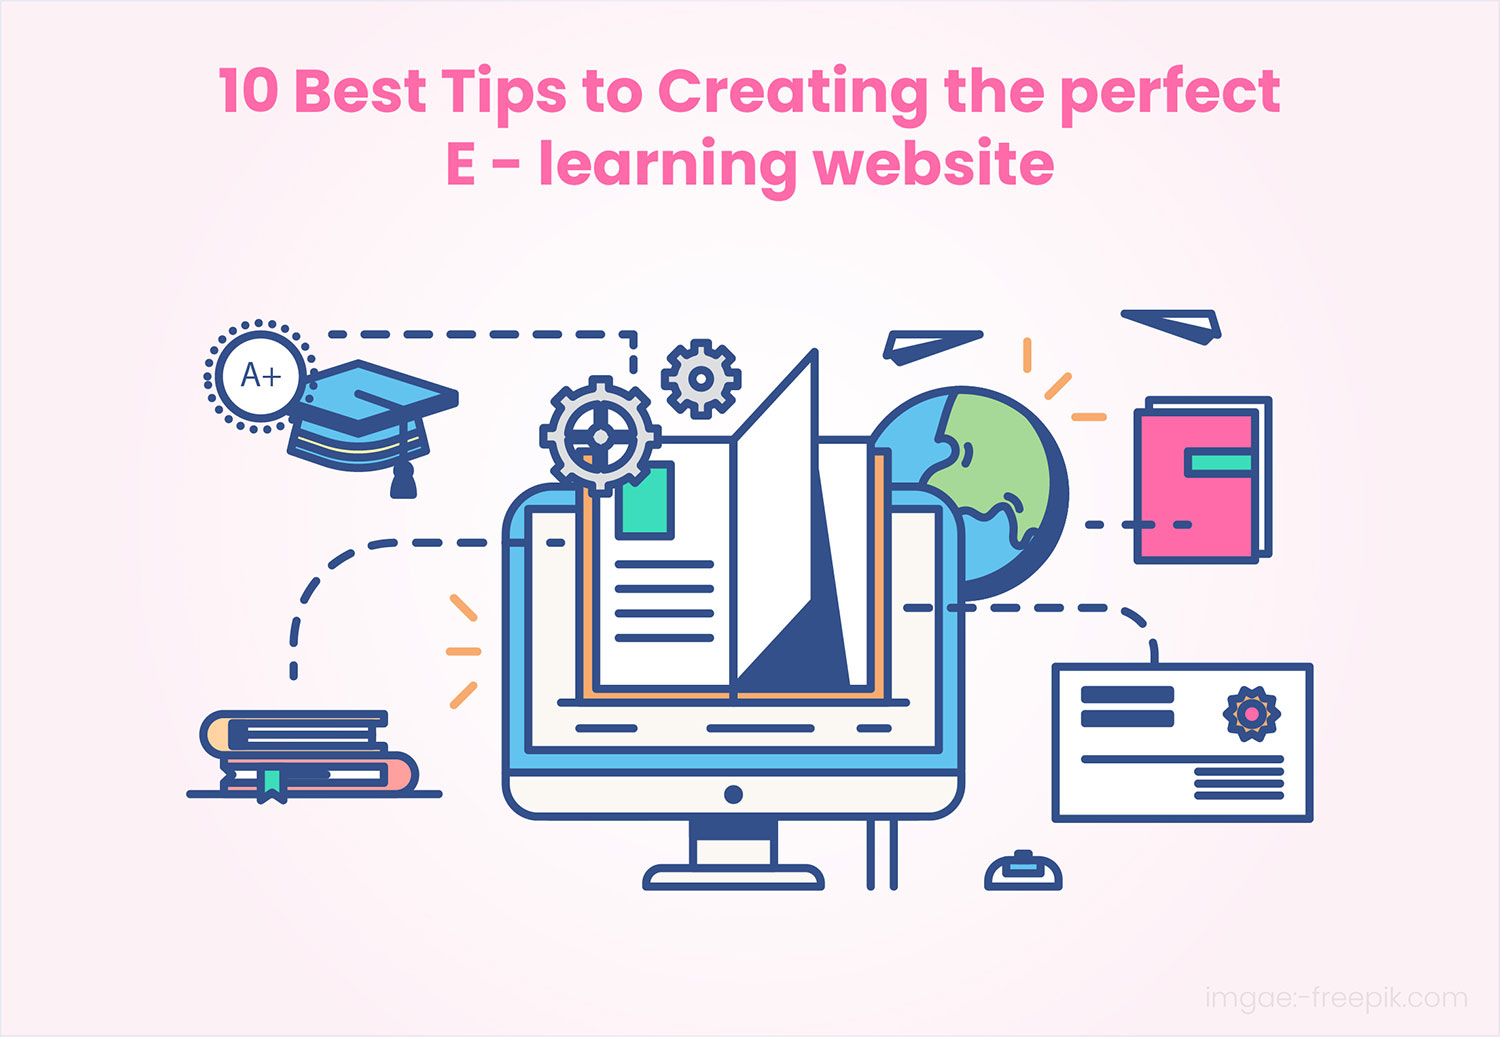 Creating the Perfect E-Learning Website